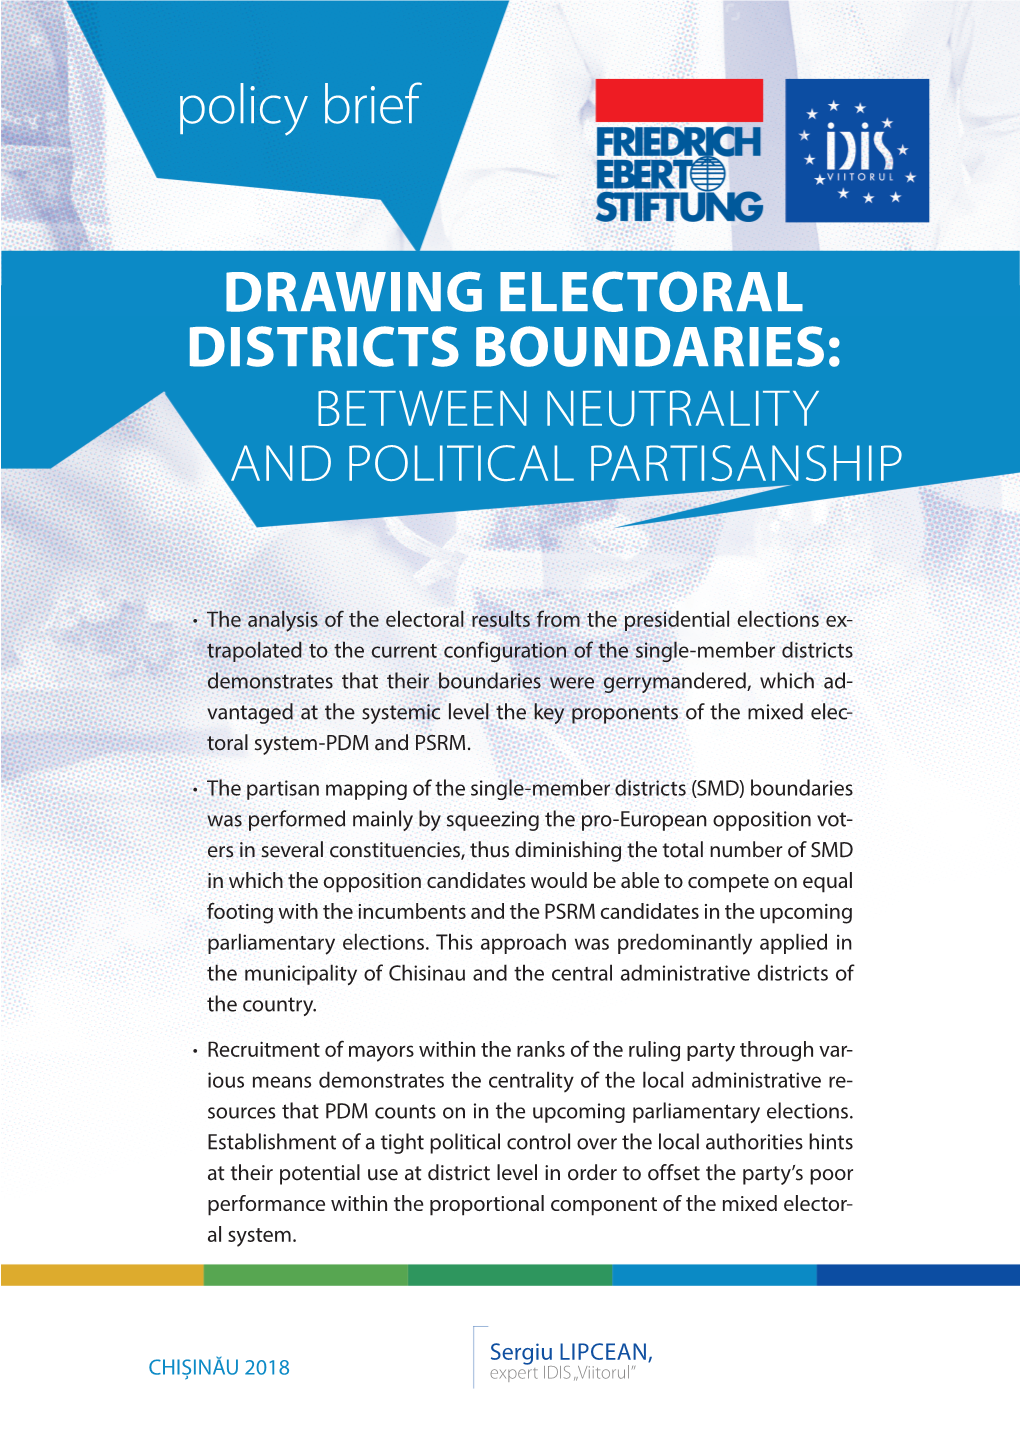 Drawing Electoral Districts Boundaries: Between Neutrality and Political Partisanship